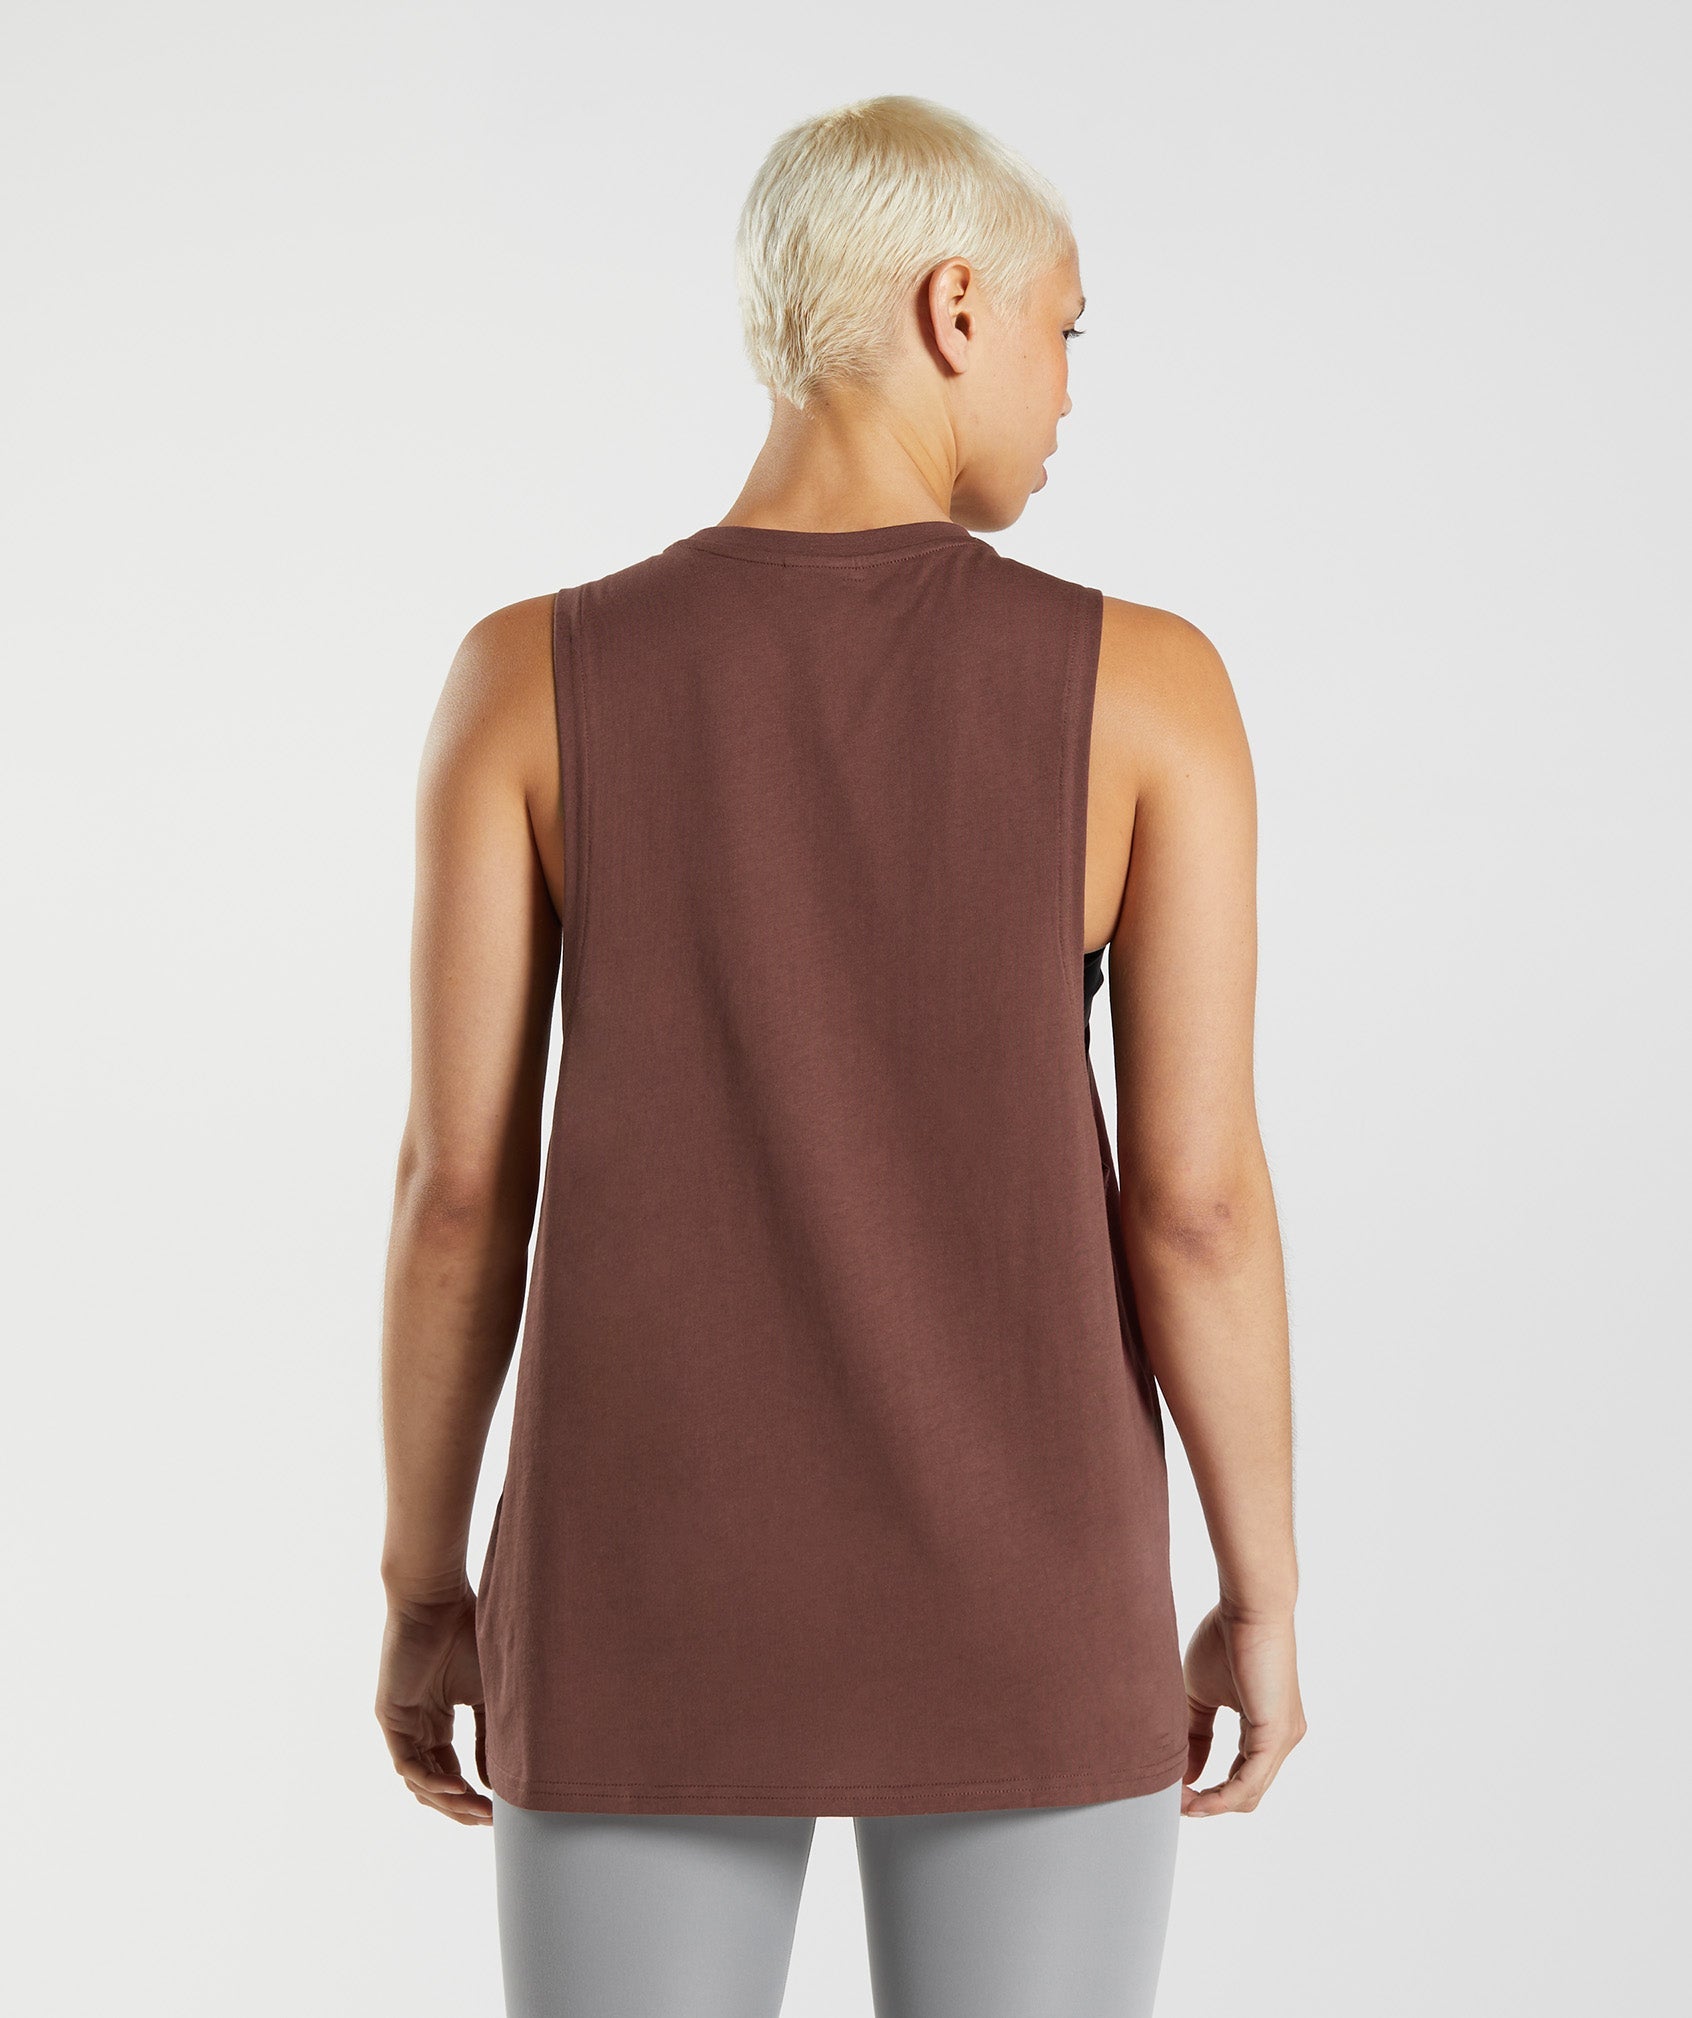 Training Drop Arm Tank in Cherry Brown - view 2